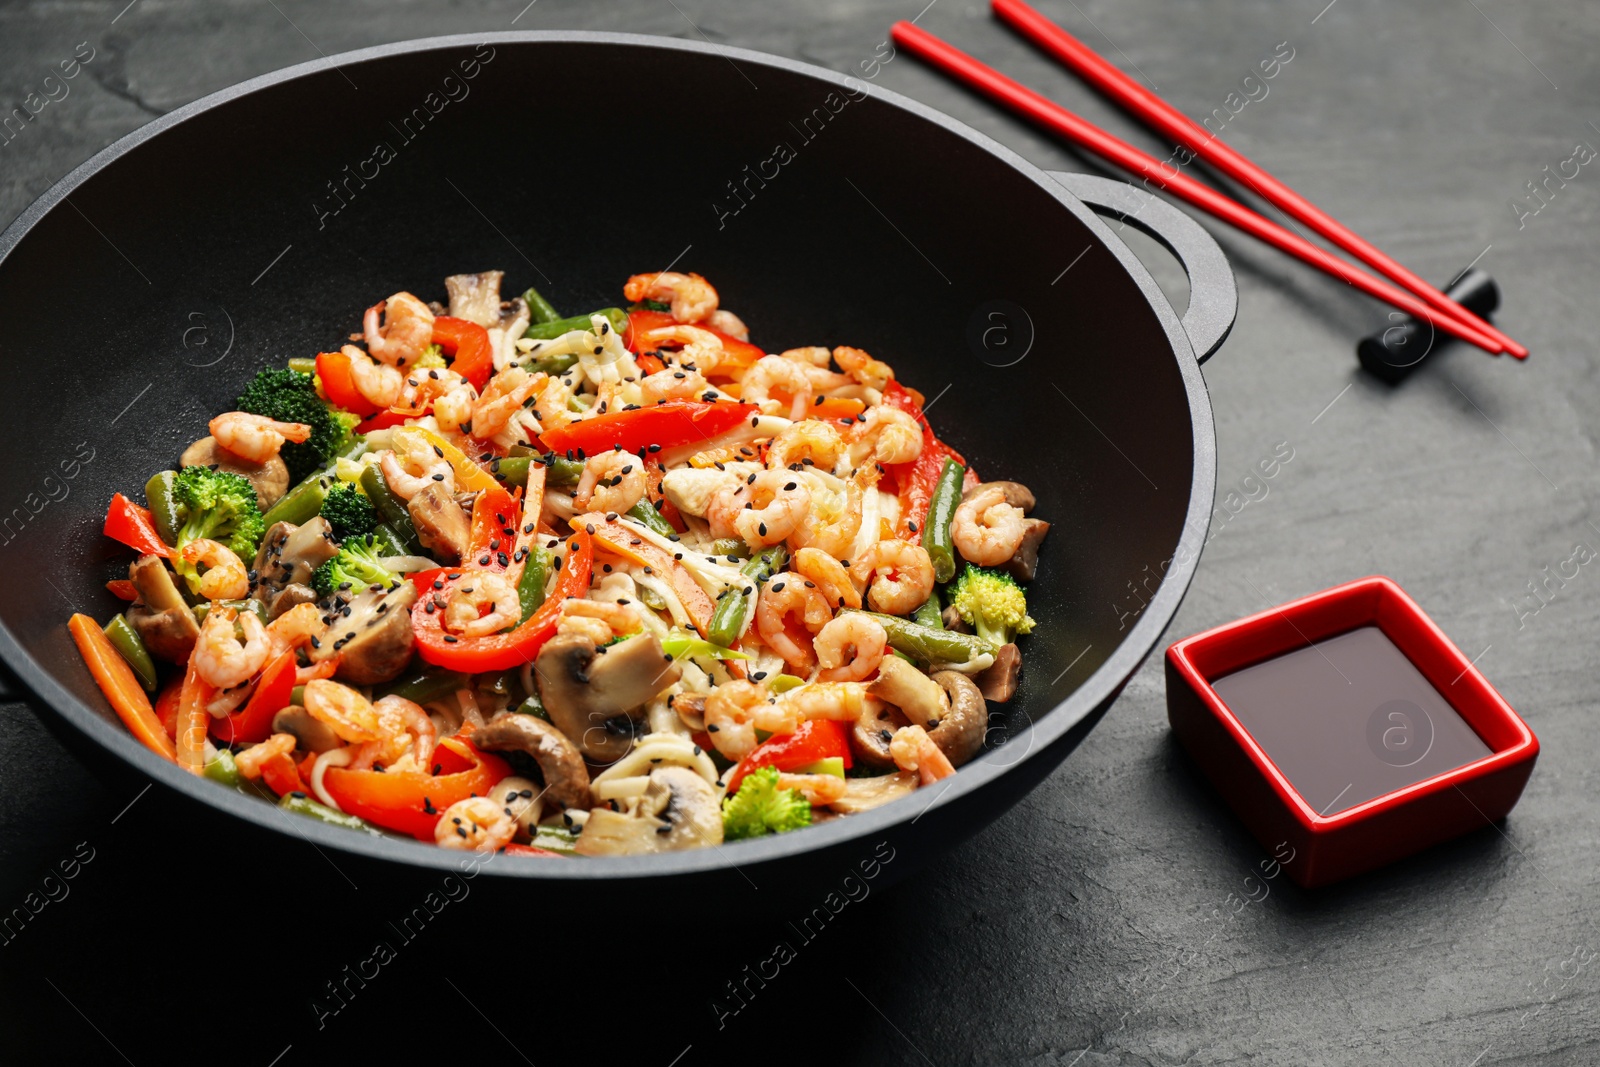 Photo of Stir fried noodles with mushrooms, shrimps and vegetables in wok on black table, closeup